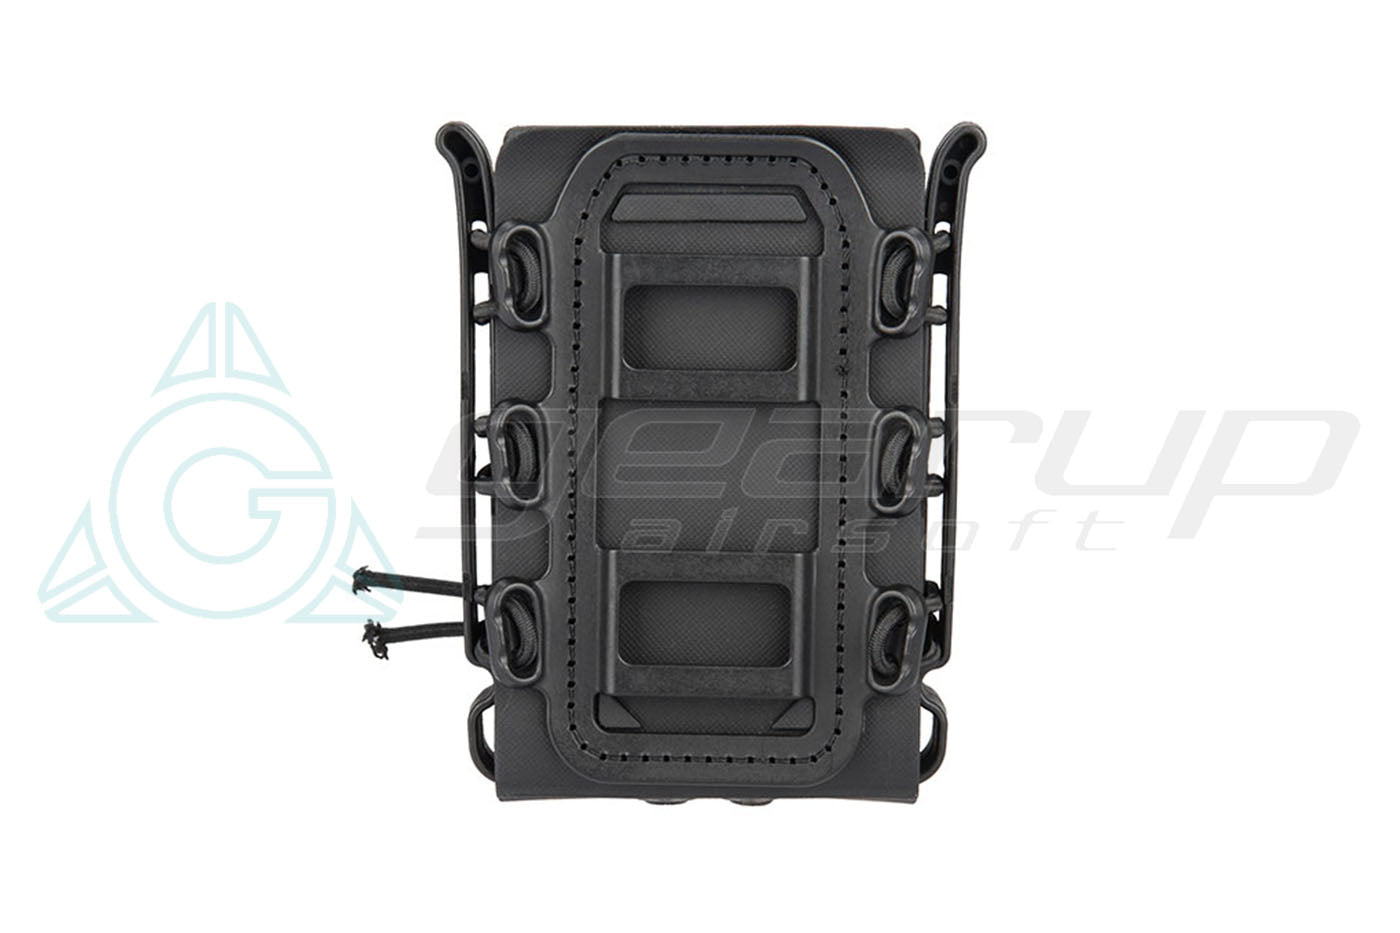 HIGH SPEED SOFT SHELL MAG POUCH (7.62) BK